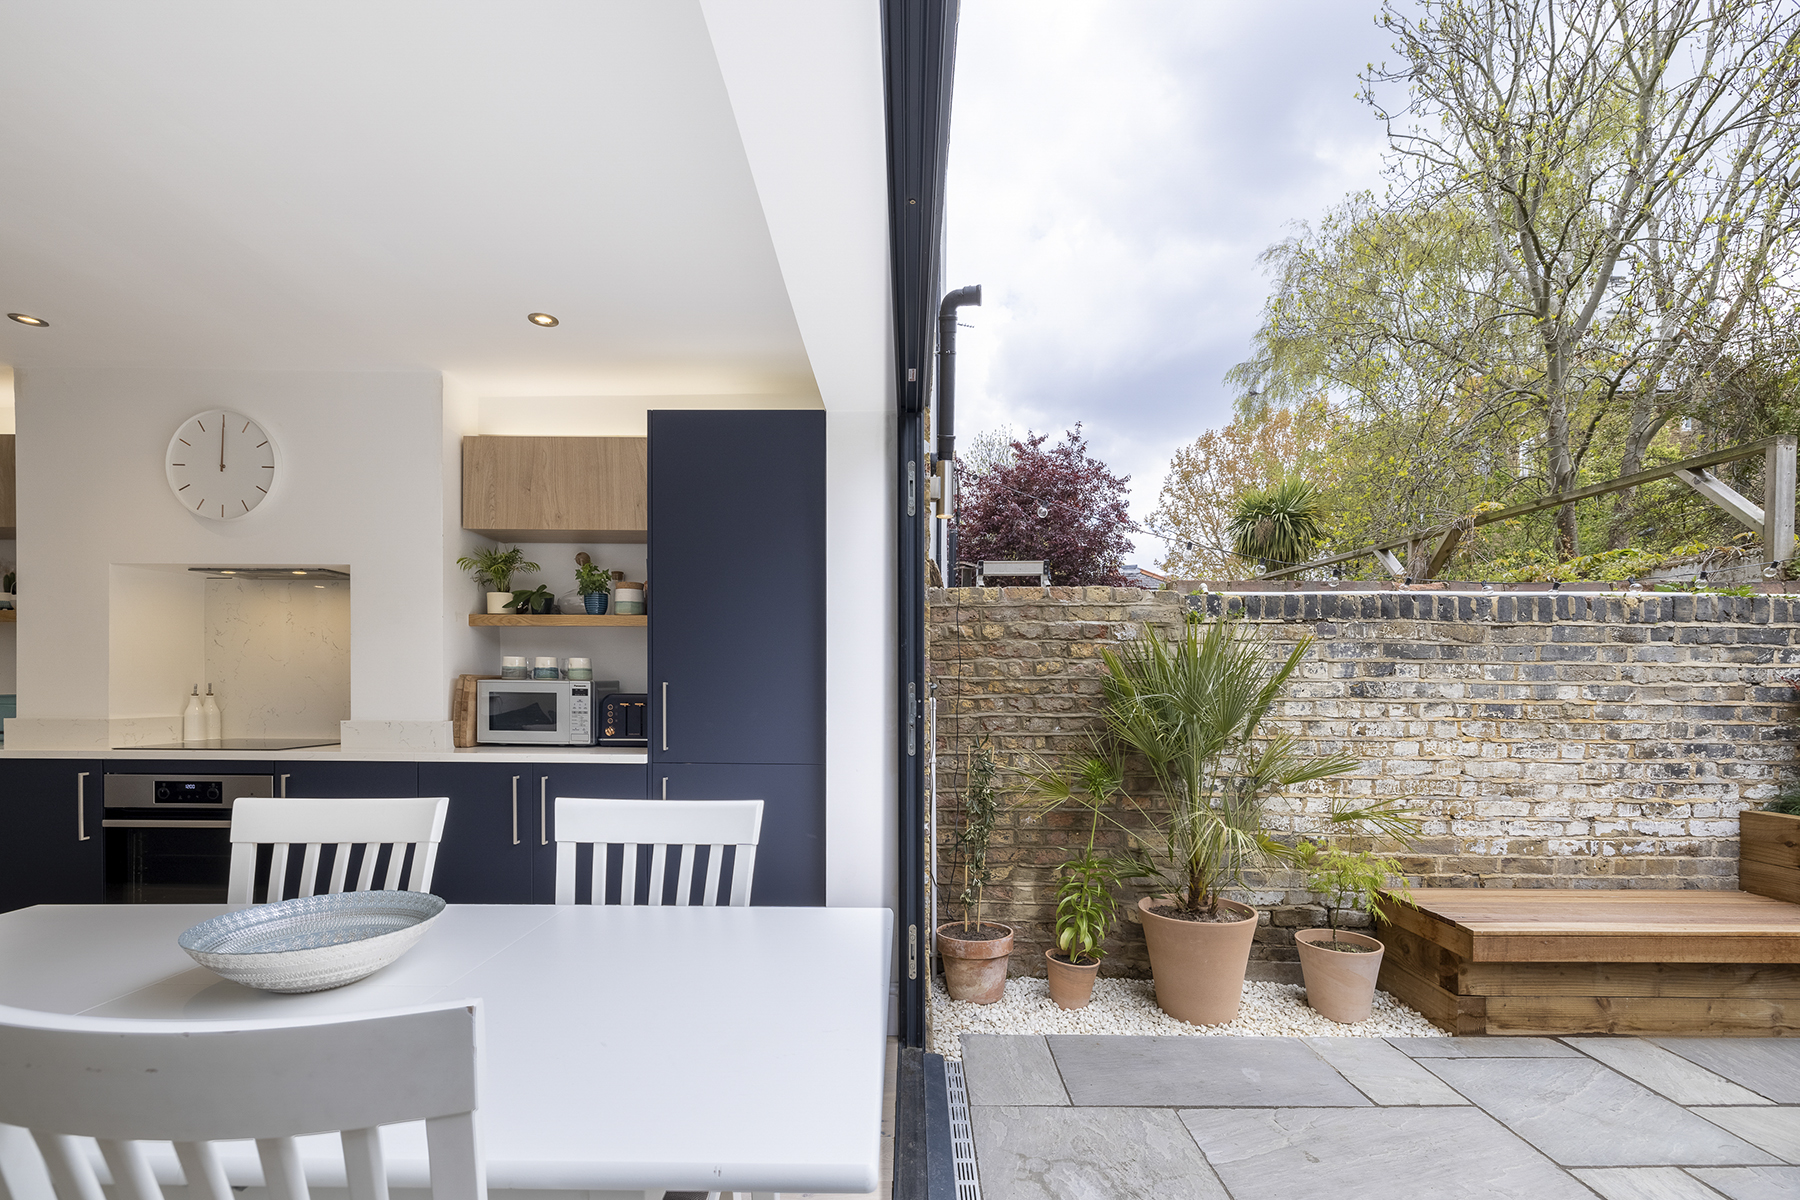 A recent completion in SW4